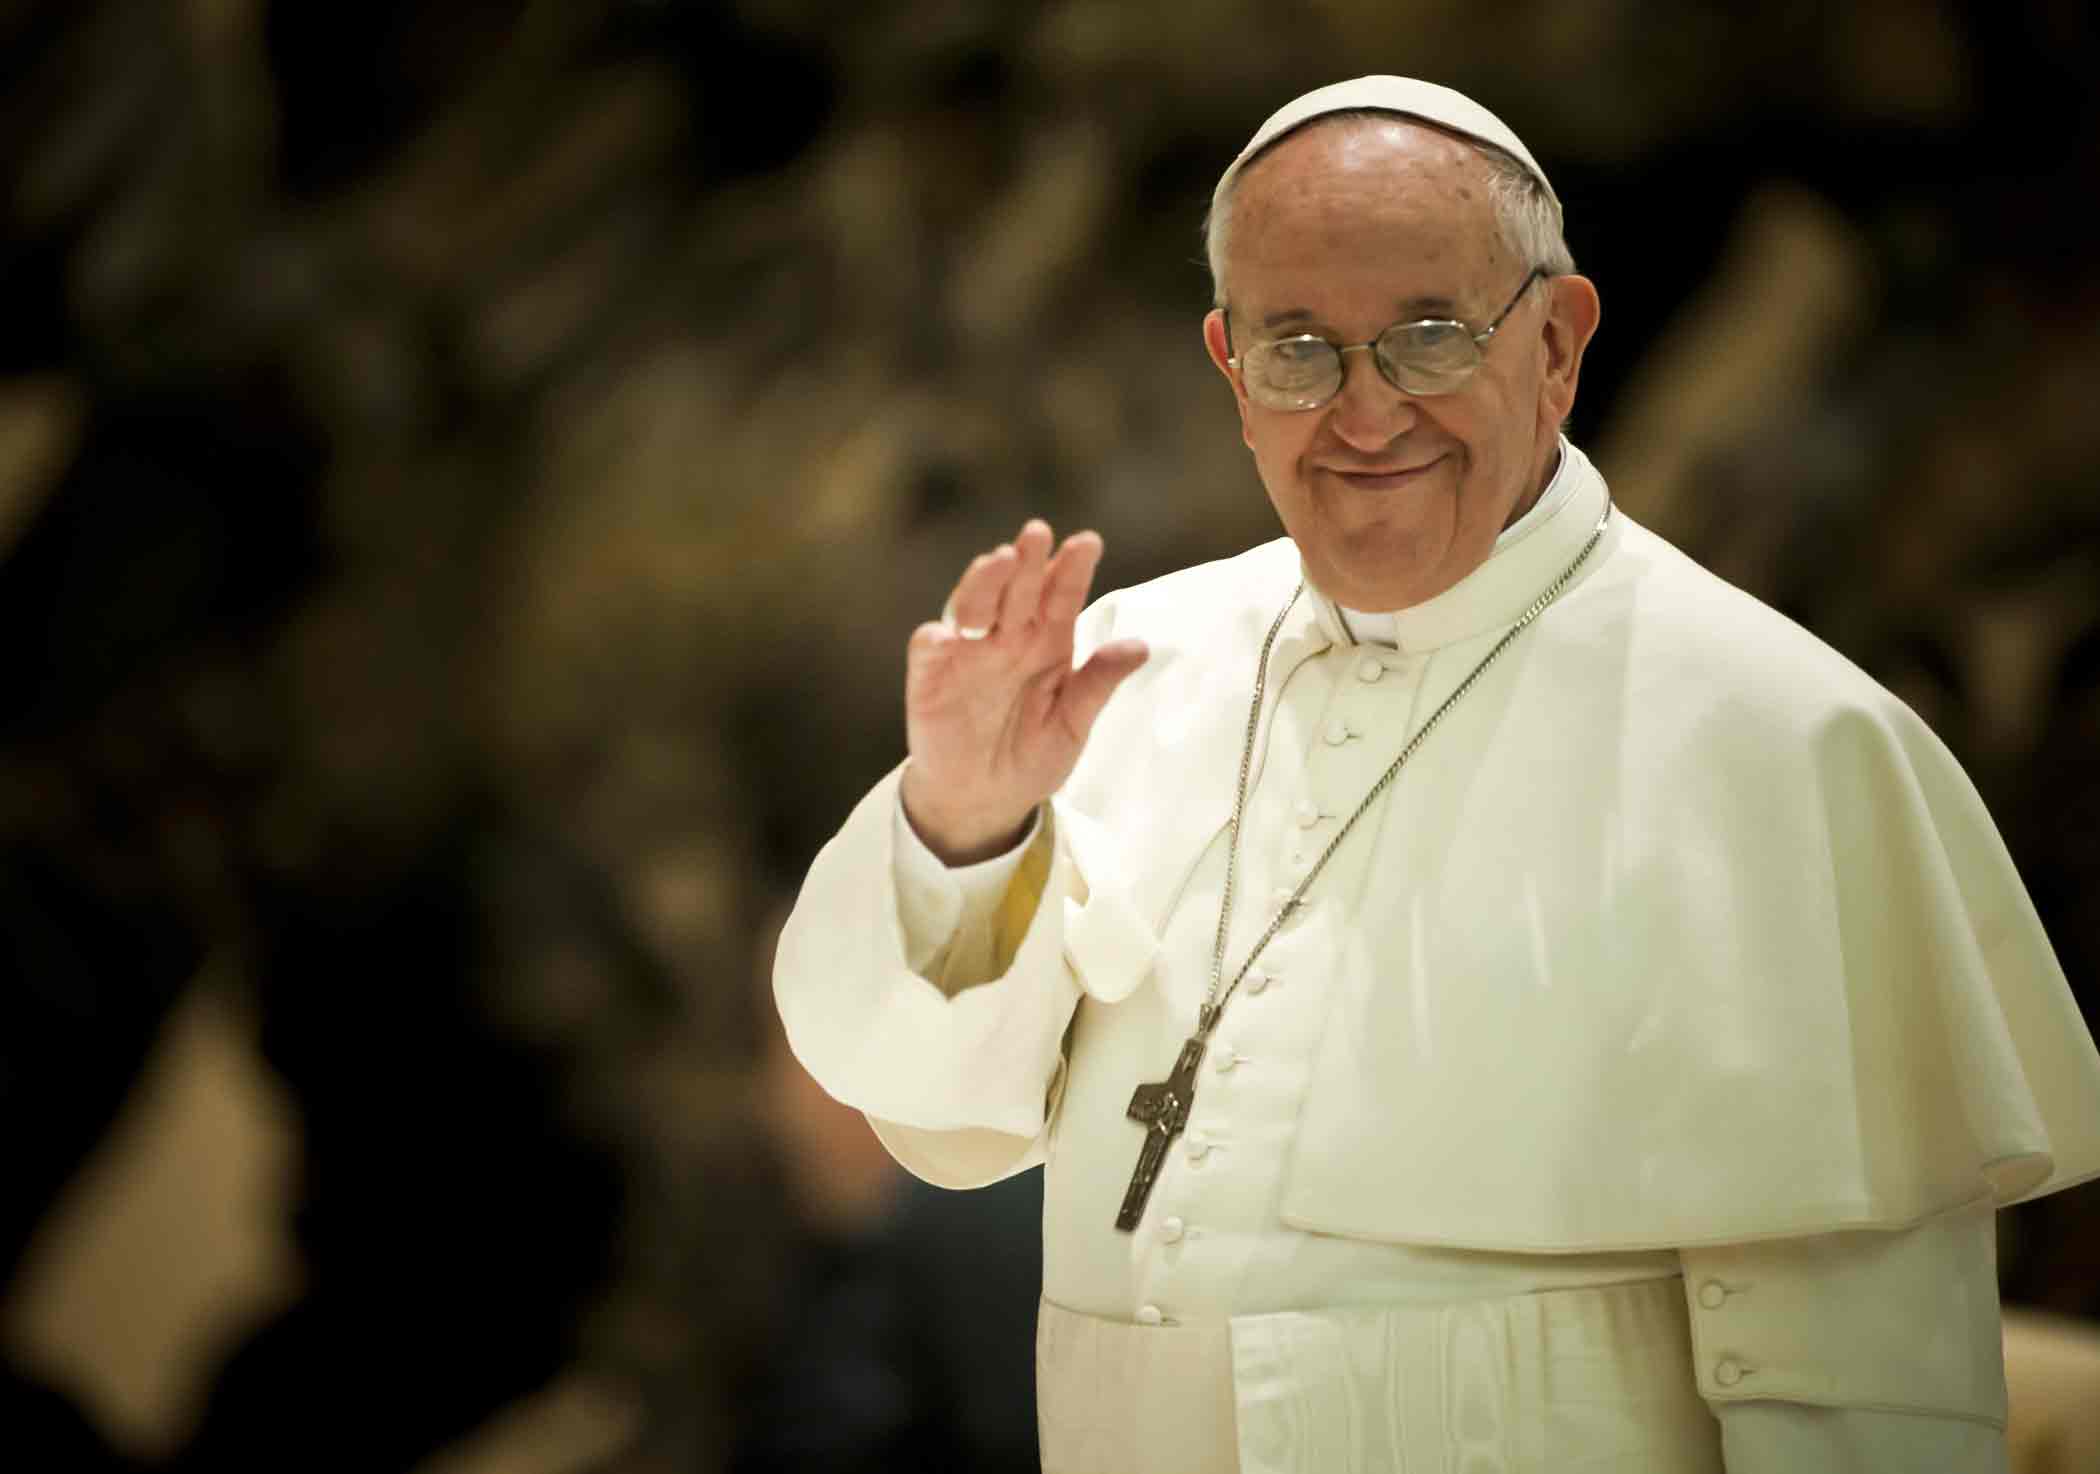 Atheists aren't so bad, says Pope Francis